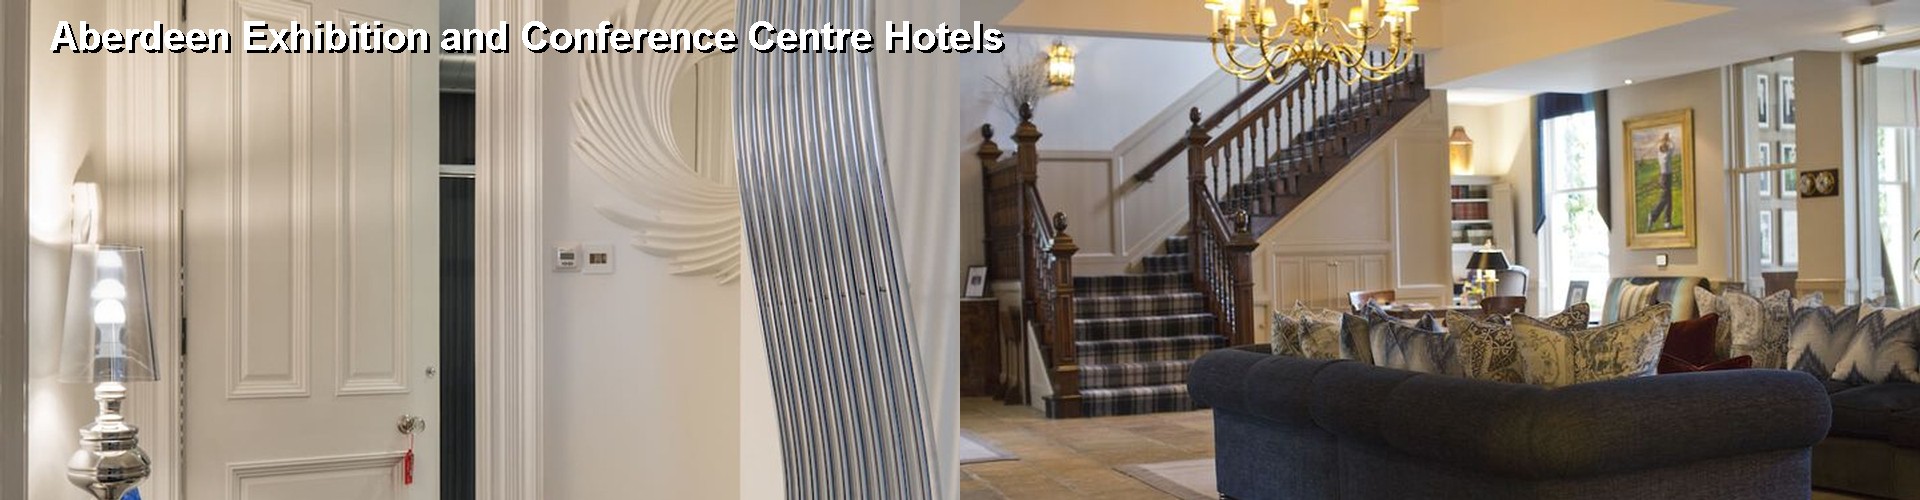 5 Best Hotels near Aberdeen Exhibition and Conference Centre